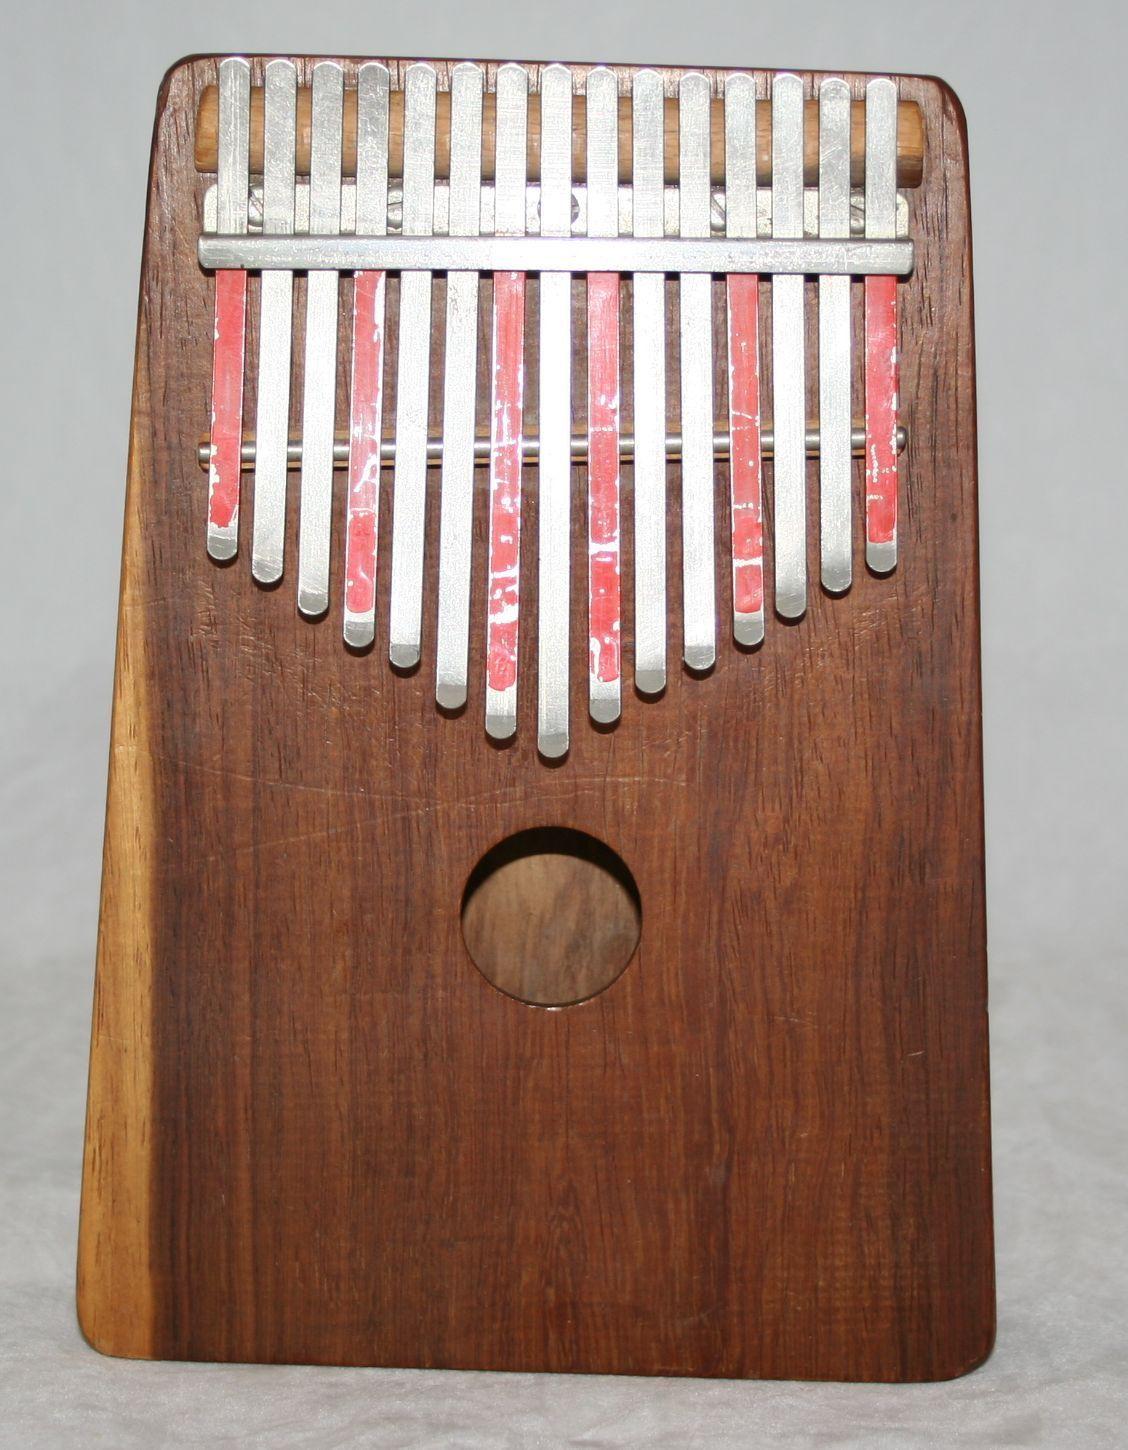 Kalimba Hugh Tracey African Musical Instrument Thumb Piano 15 Note